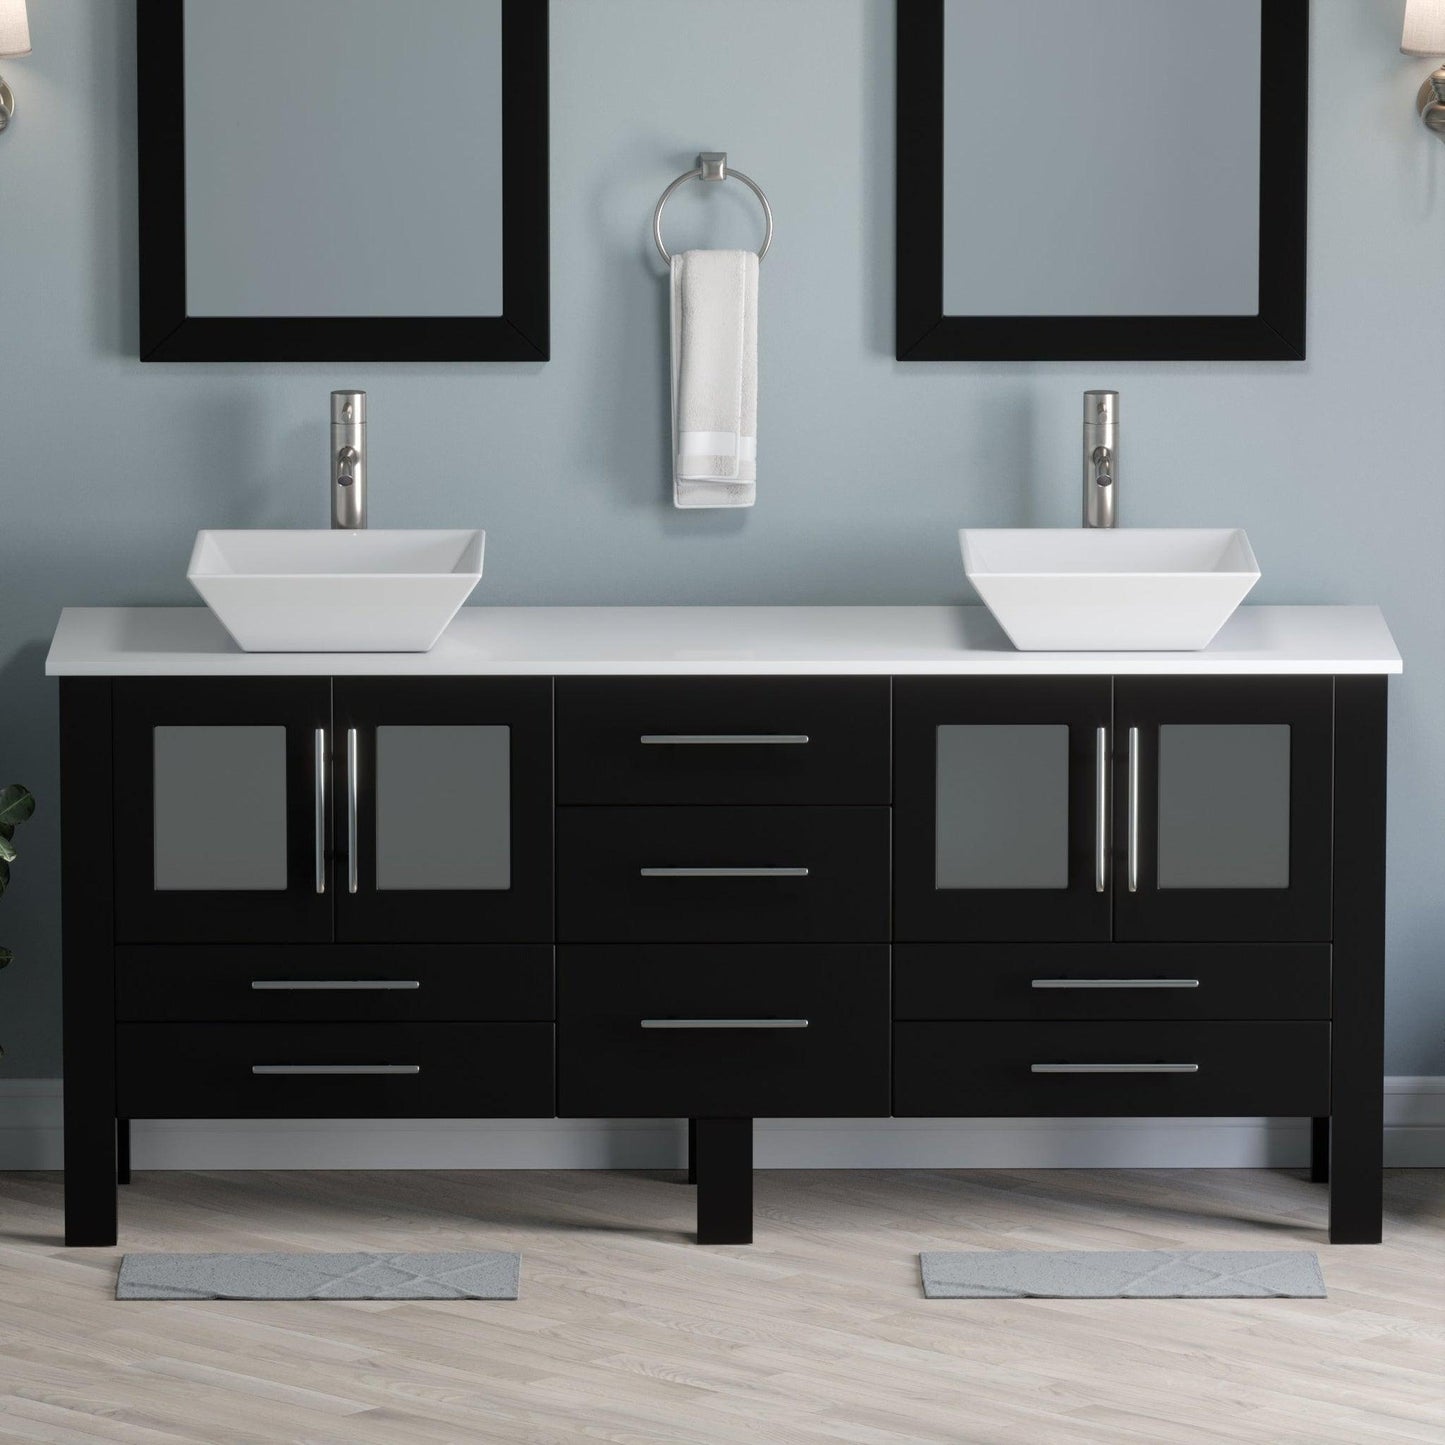 Cambridge Plumbing 72" Black Espresso Wood Double Vanity Set With Porcelain Countertop And Square Vessel Sink With Brushed Nickel Plumbing Finish